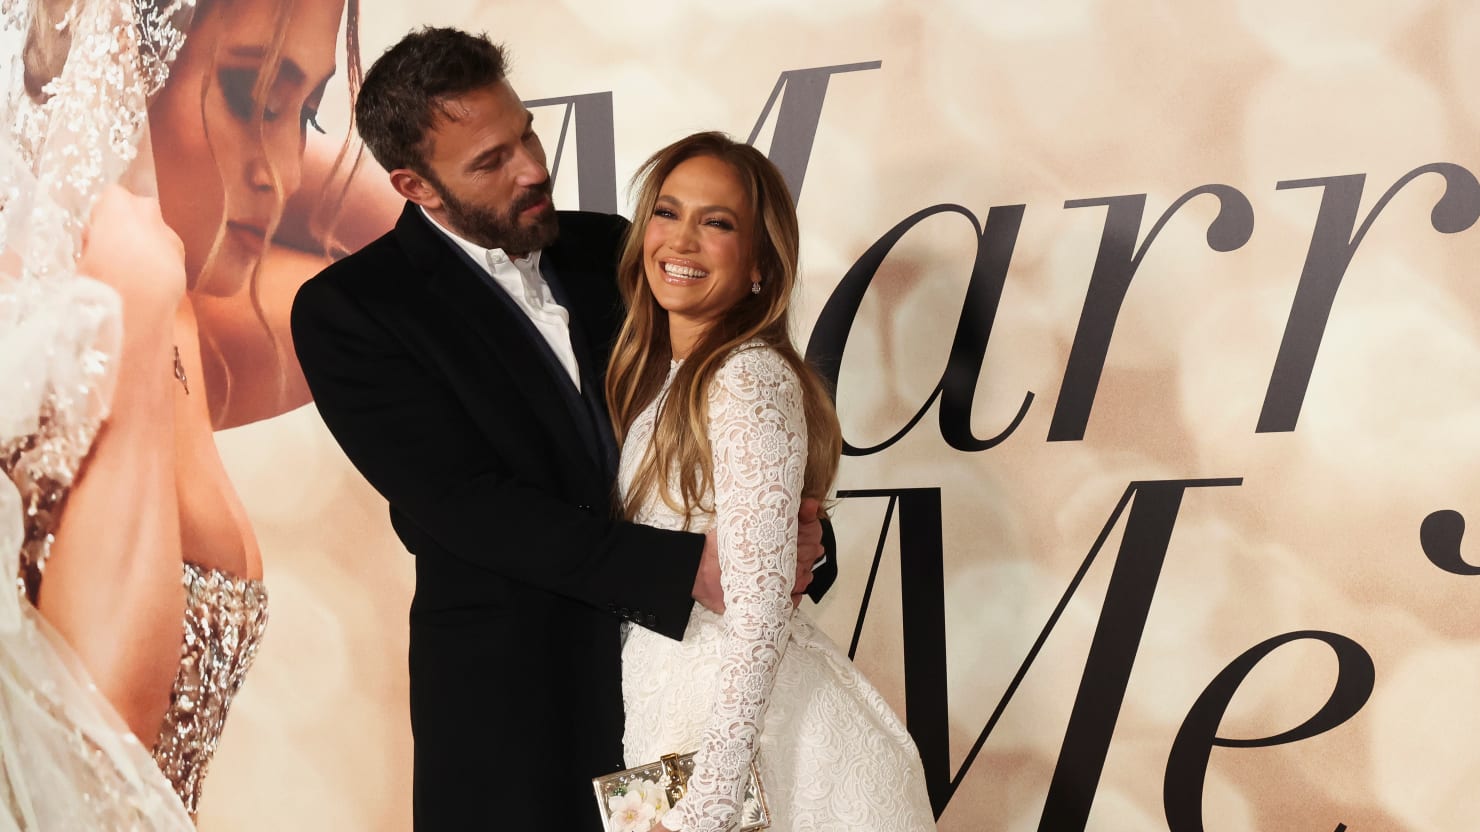 Jen and Ben’s Second Wedding Was Full of Affleck Family Drama – The Daily Beast